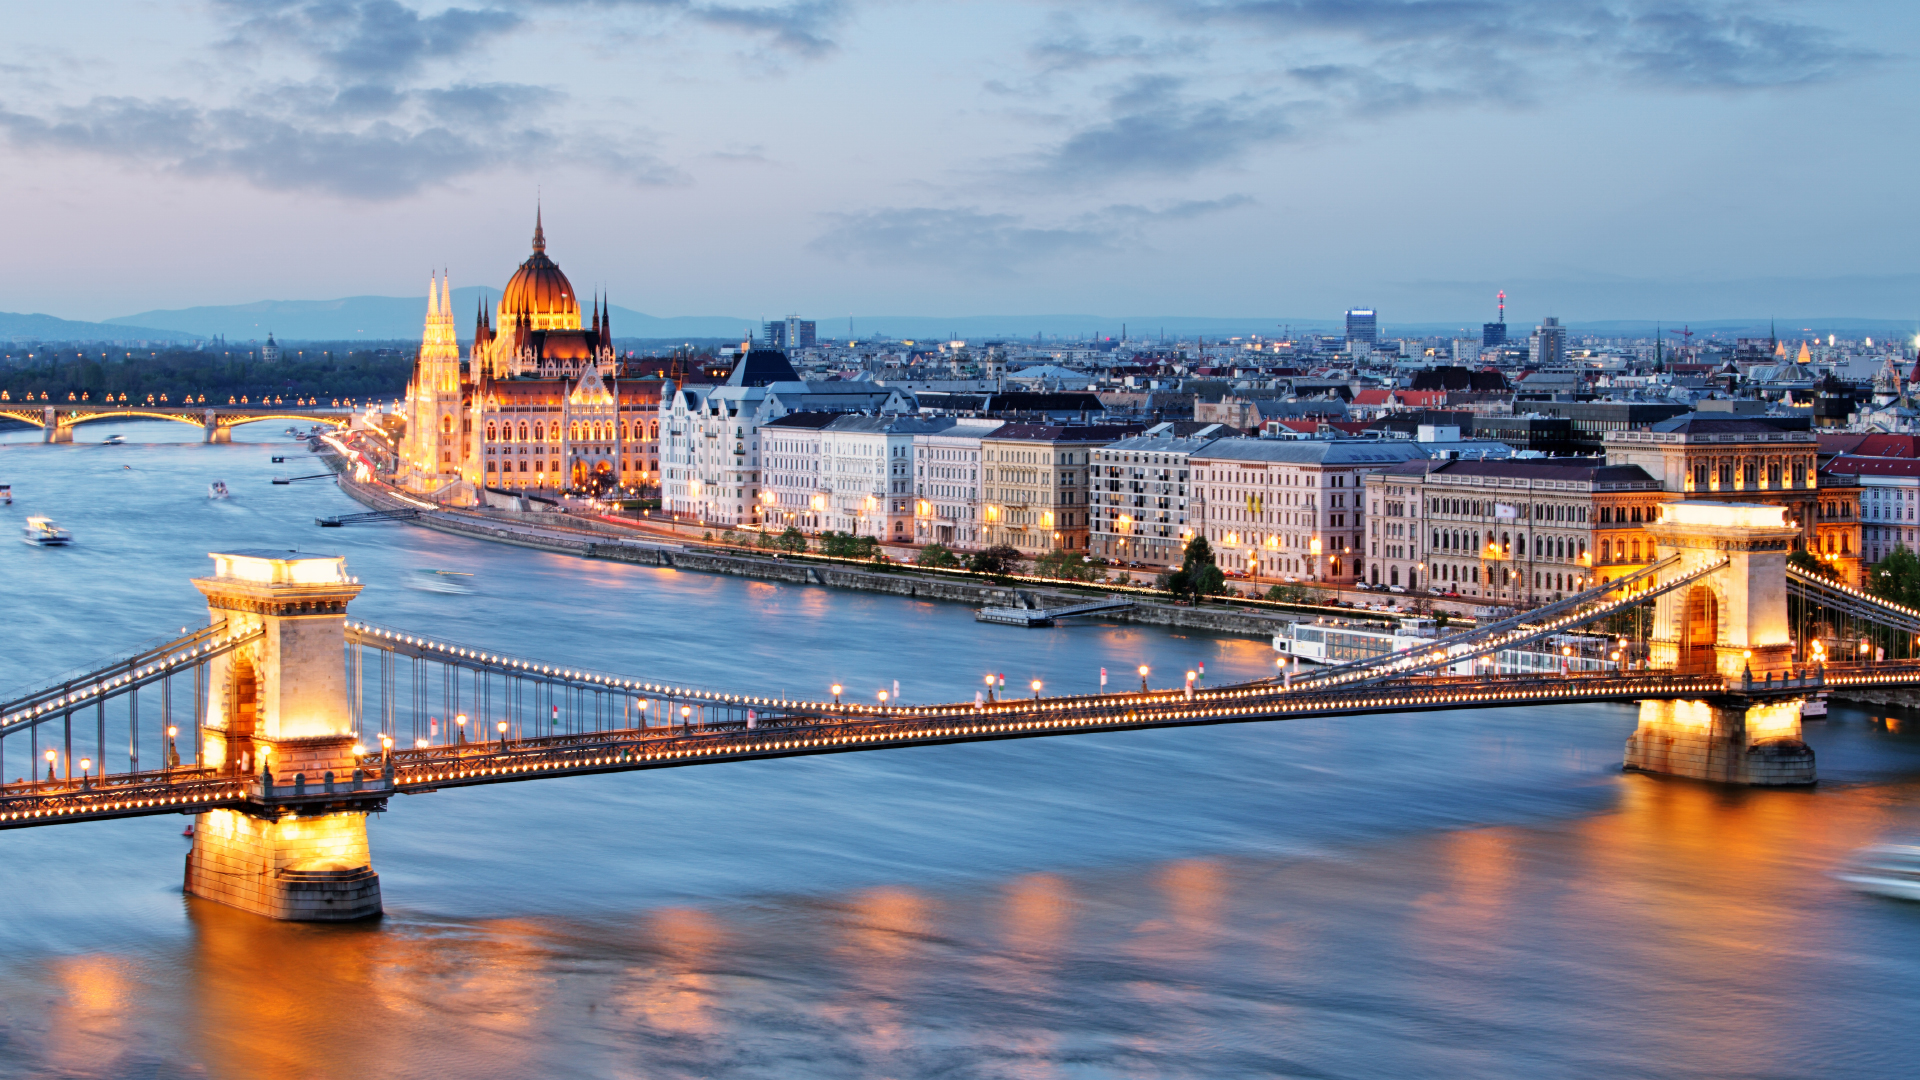 View of Budapest: the Chain Bridge in the foreground and the Royal Palace in the background